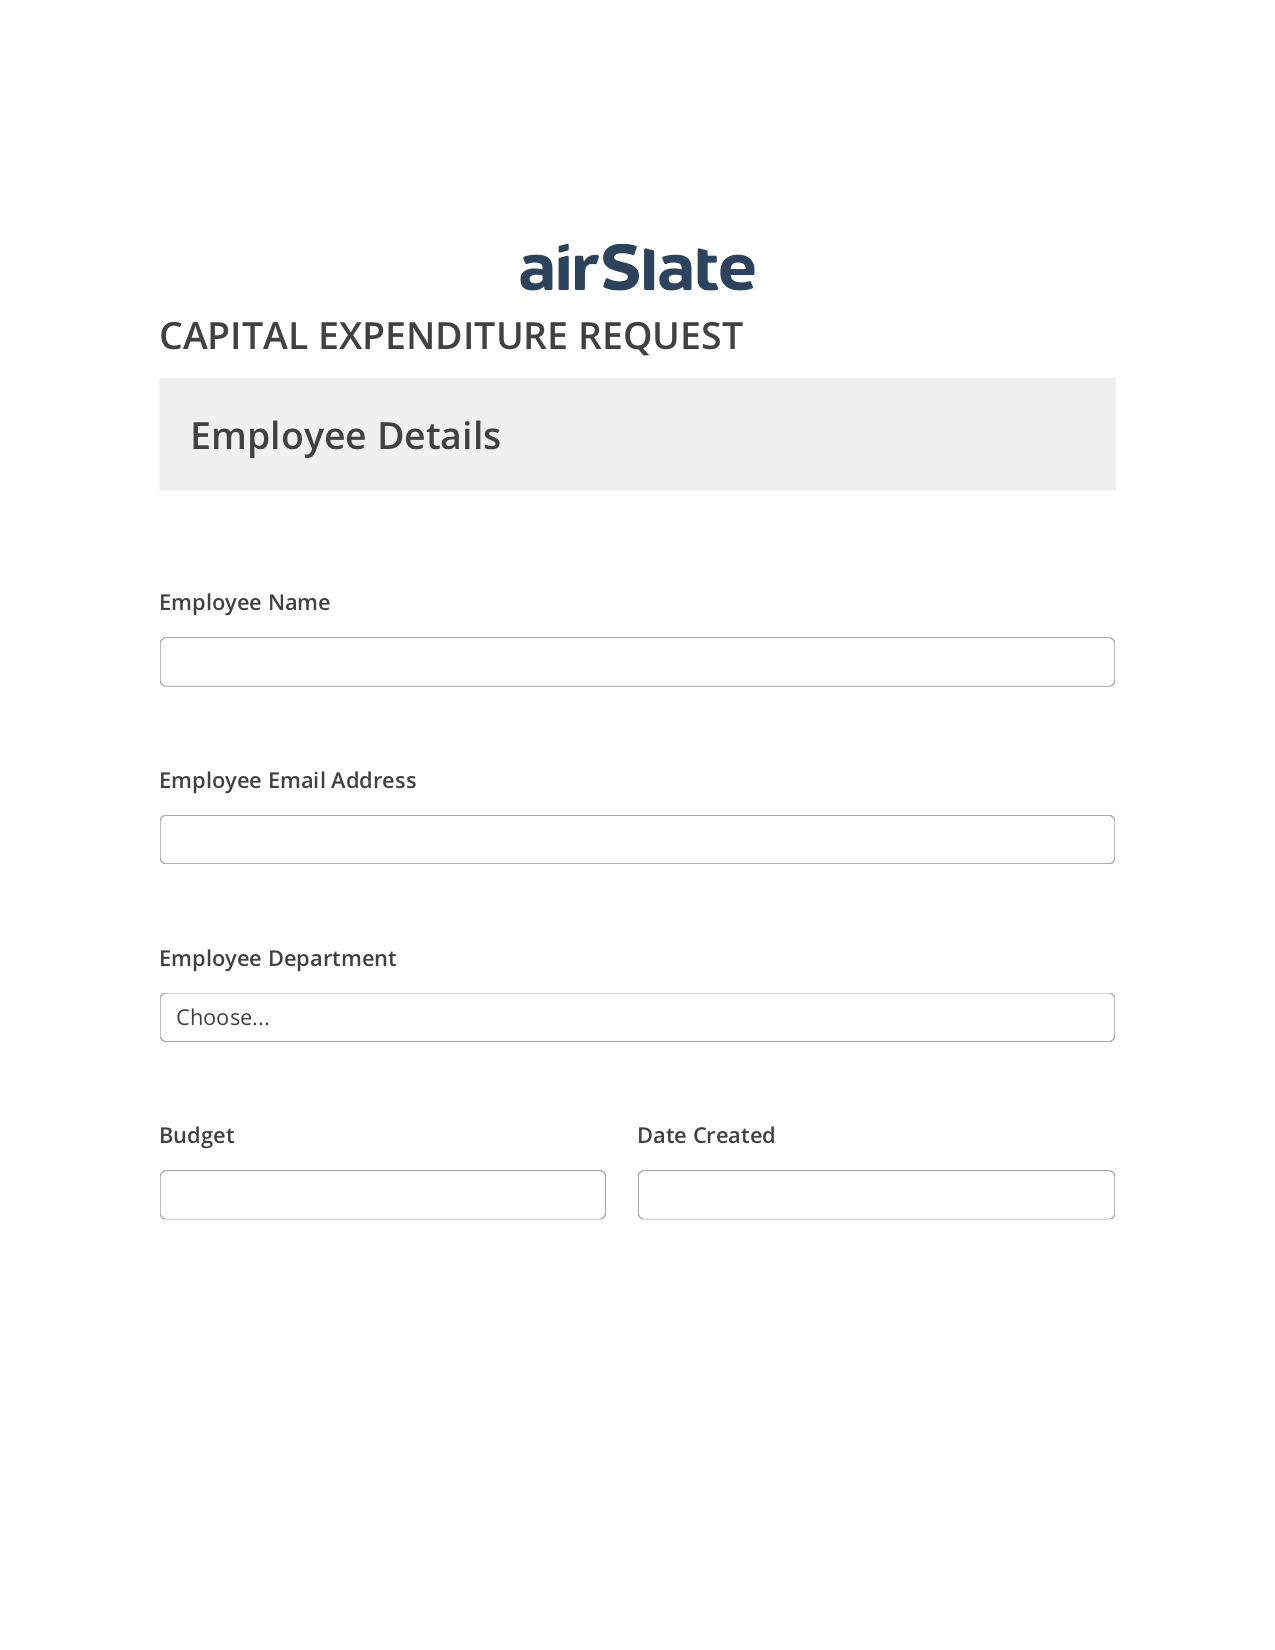 Capital Expenditure Request Approval Workflow Pre-fill from Excel Spreadsheet Bot, Create slate bot, Export to NetSuite Bot